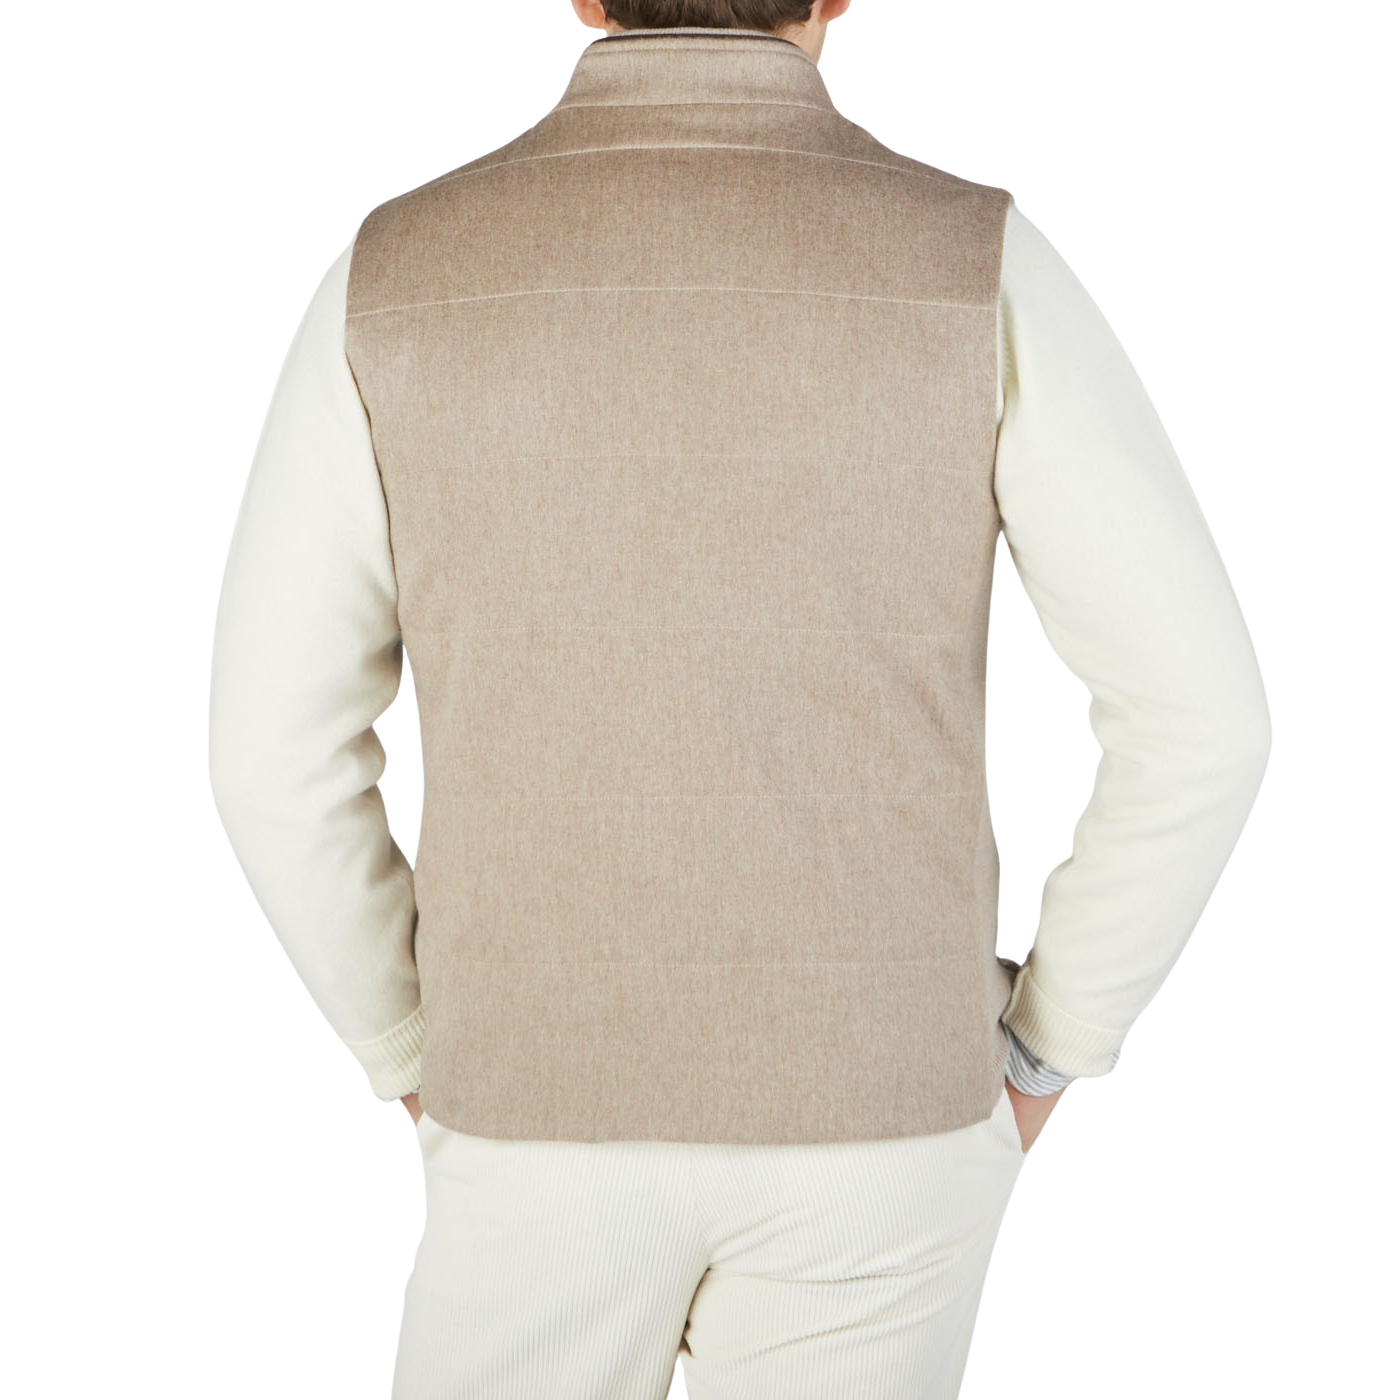 The back view of a man wearing a Maurizio Baldassari Beige Water Repellent Pure Cashmere Gilet in oatmeal beige.